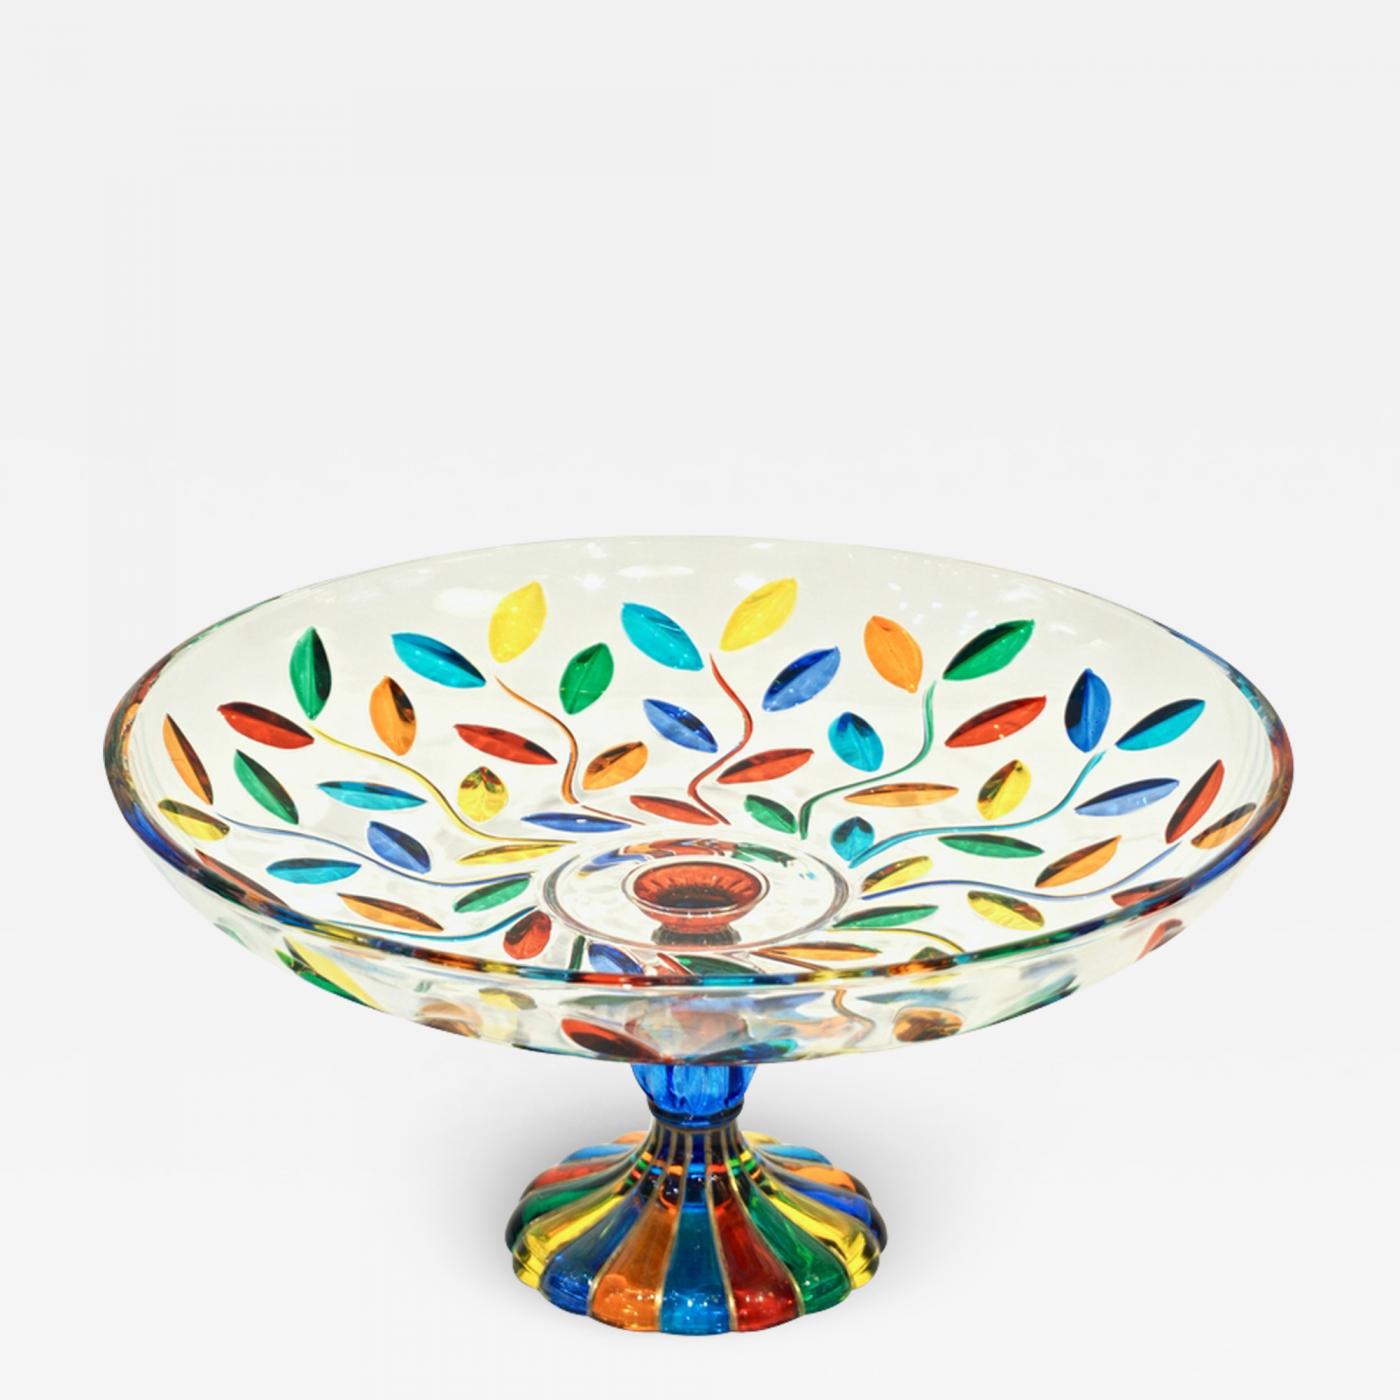 https://cdn.incollect.com/sites/default/files/zoom/Colleoni-Modern-Crystal-Murano-Glass-Compote-Dish-Tazza-with-Colorful-Leaves-374329-1435470.jpg